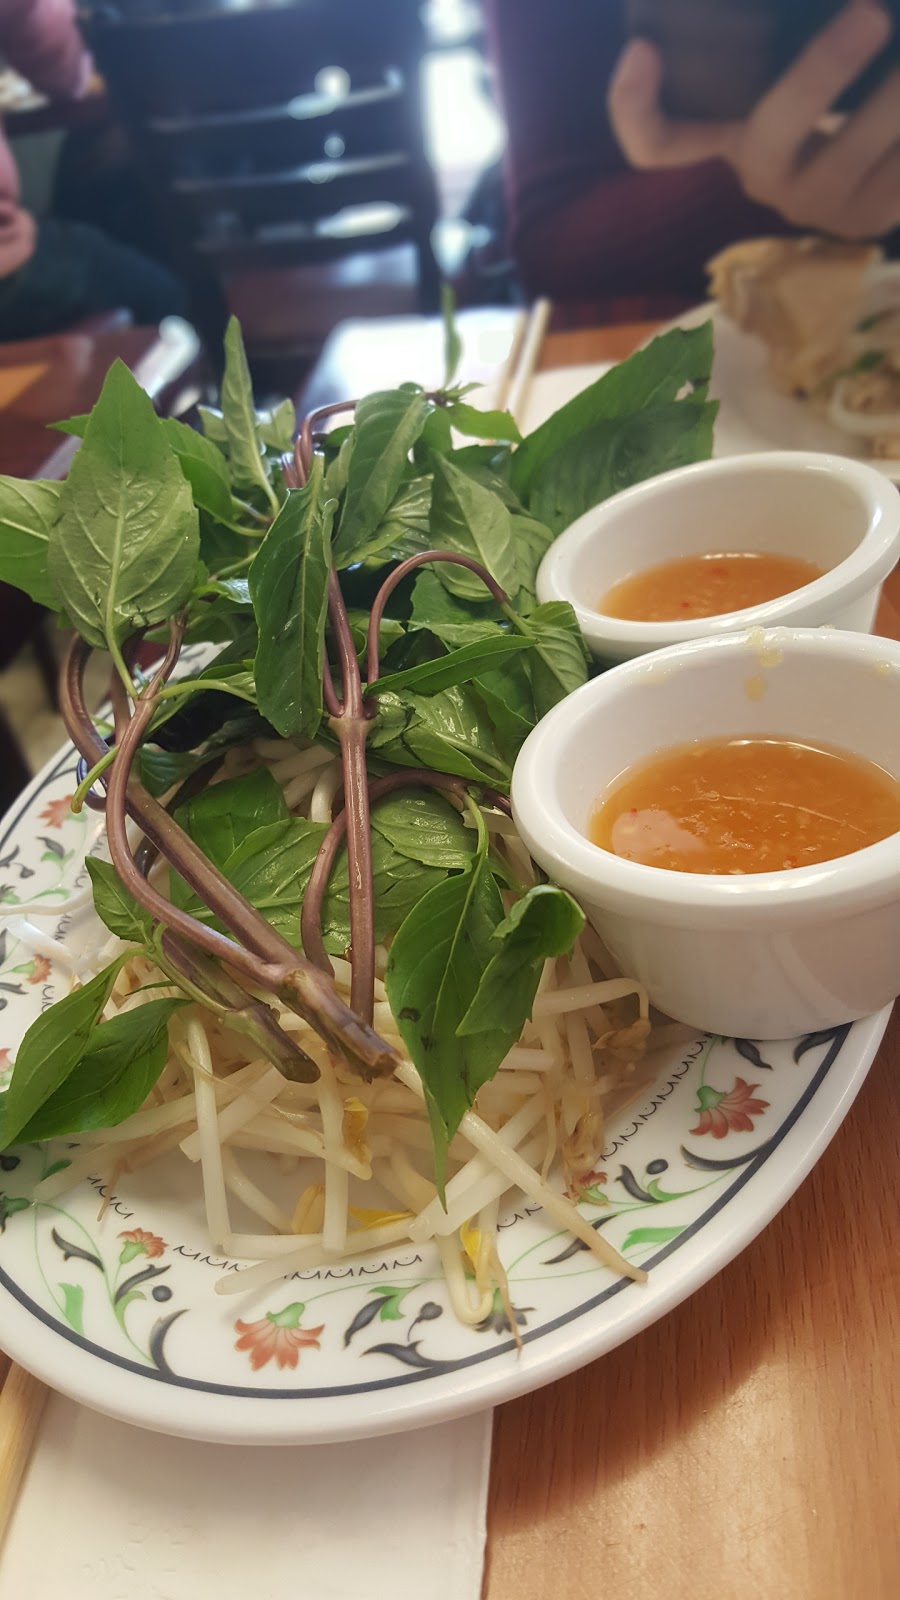 Phở Phong Hải | 8433 Westminster Blvd., Westminster, CA 92683 | Phone: (714) 417-7986